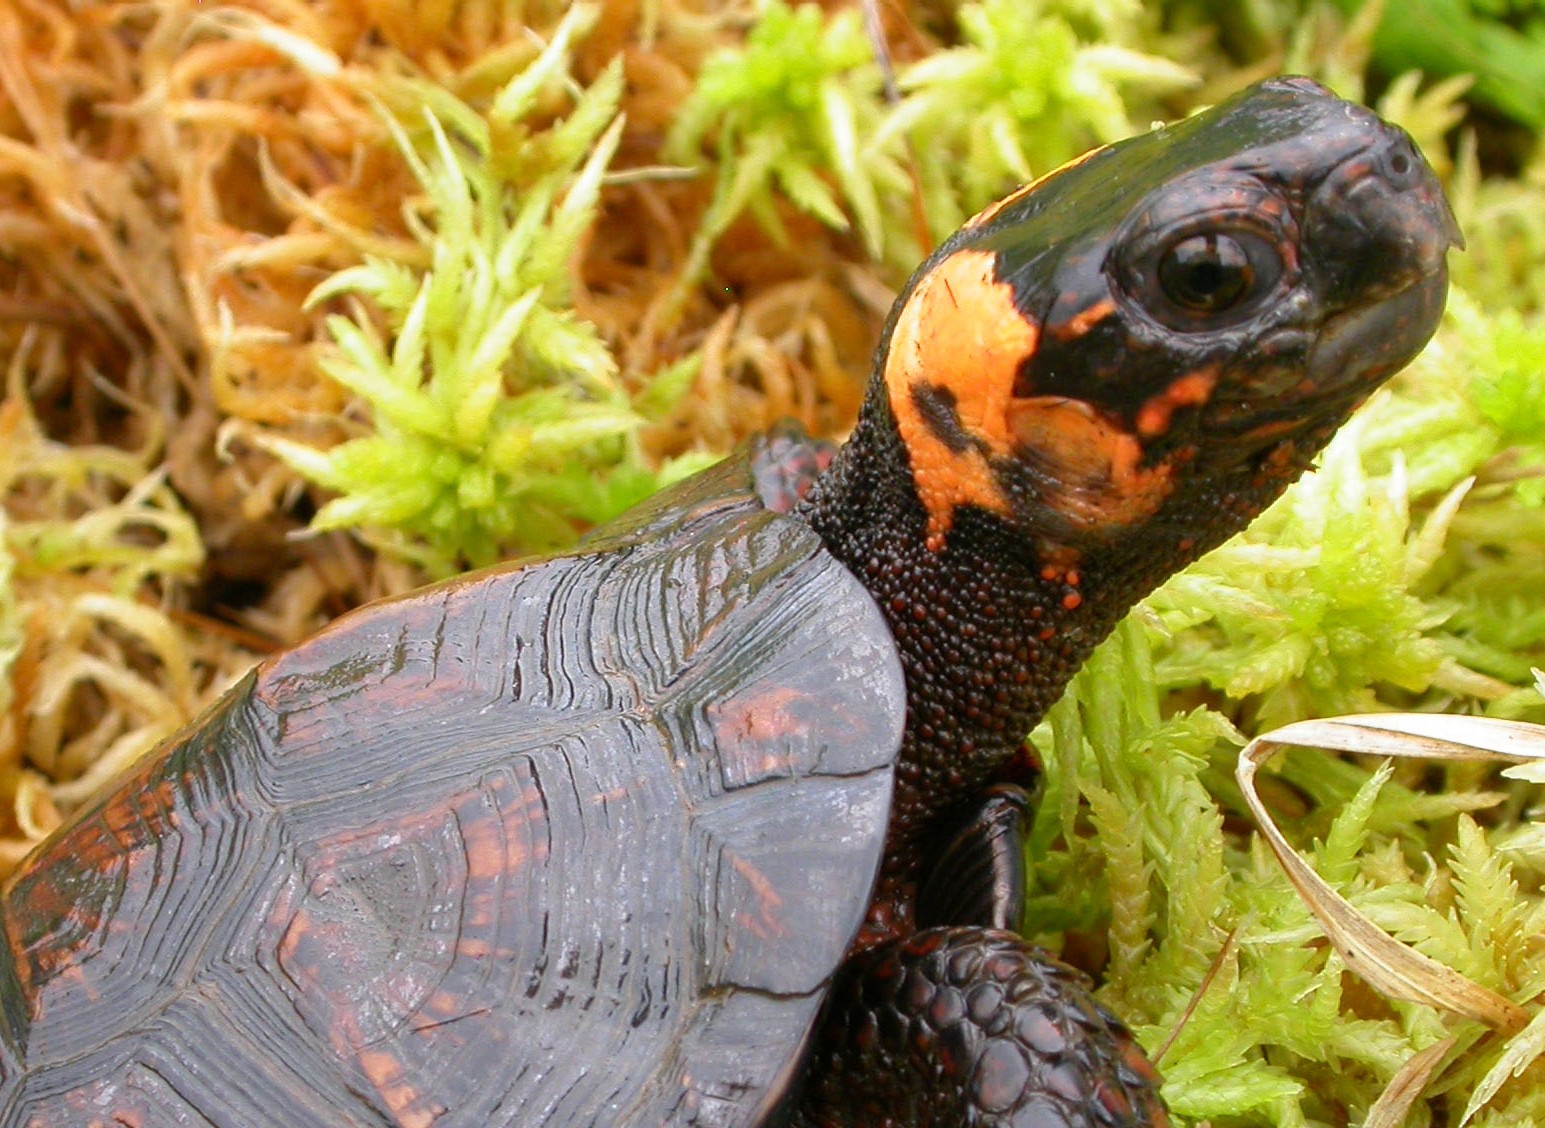 Bog turtles are elusive creatures on the Blue Ridge Parkway lands.